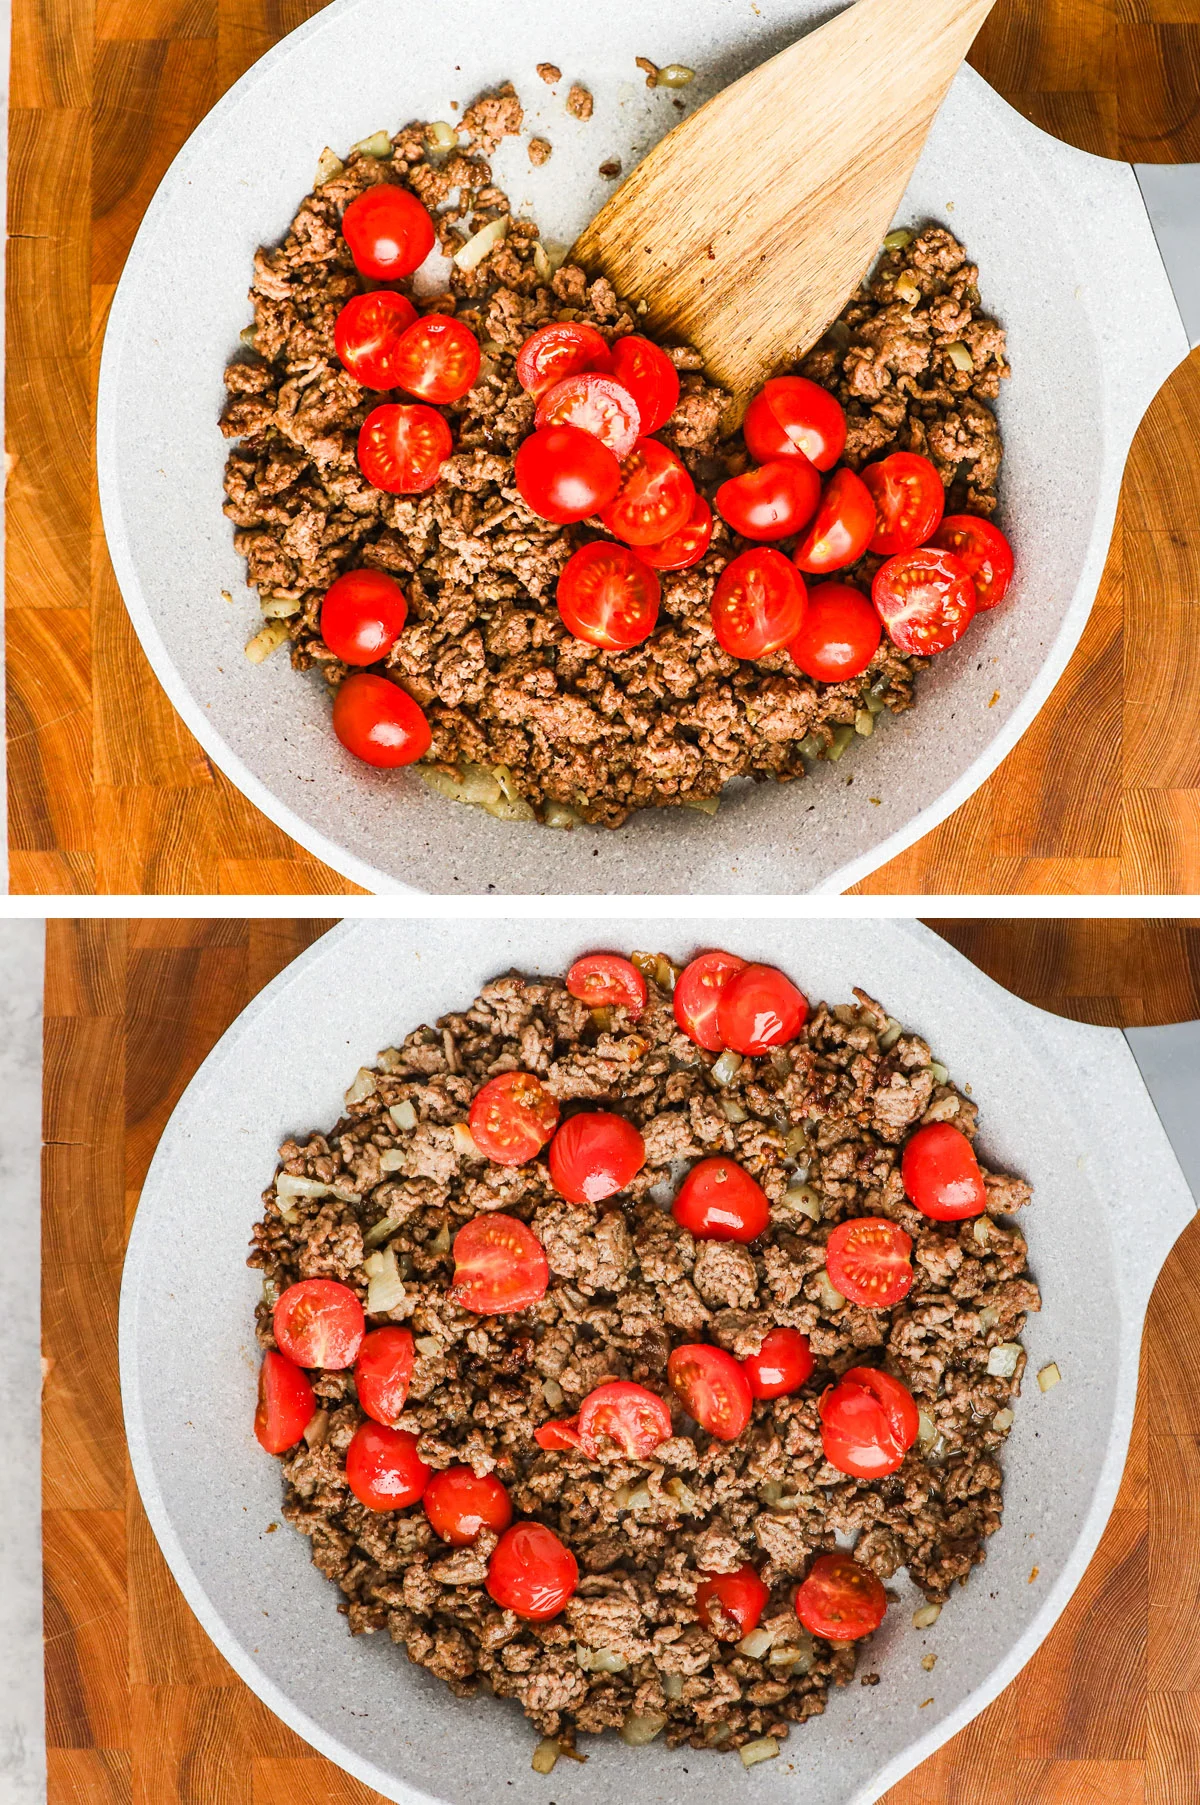 Two images of cherry tomatoes, ground beef and onion in a frying pan.